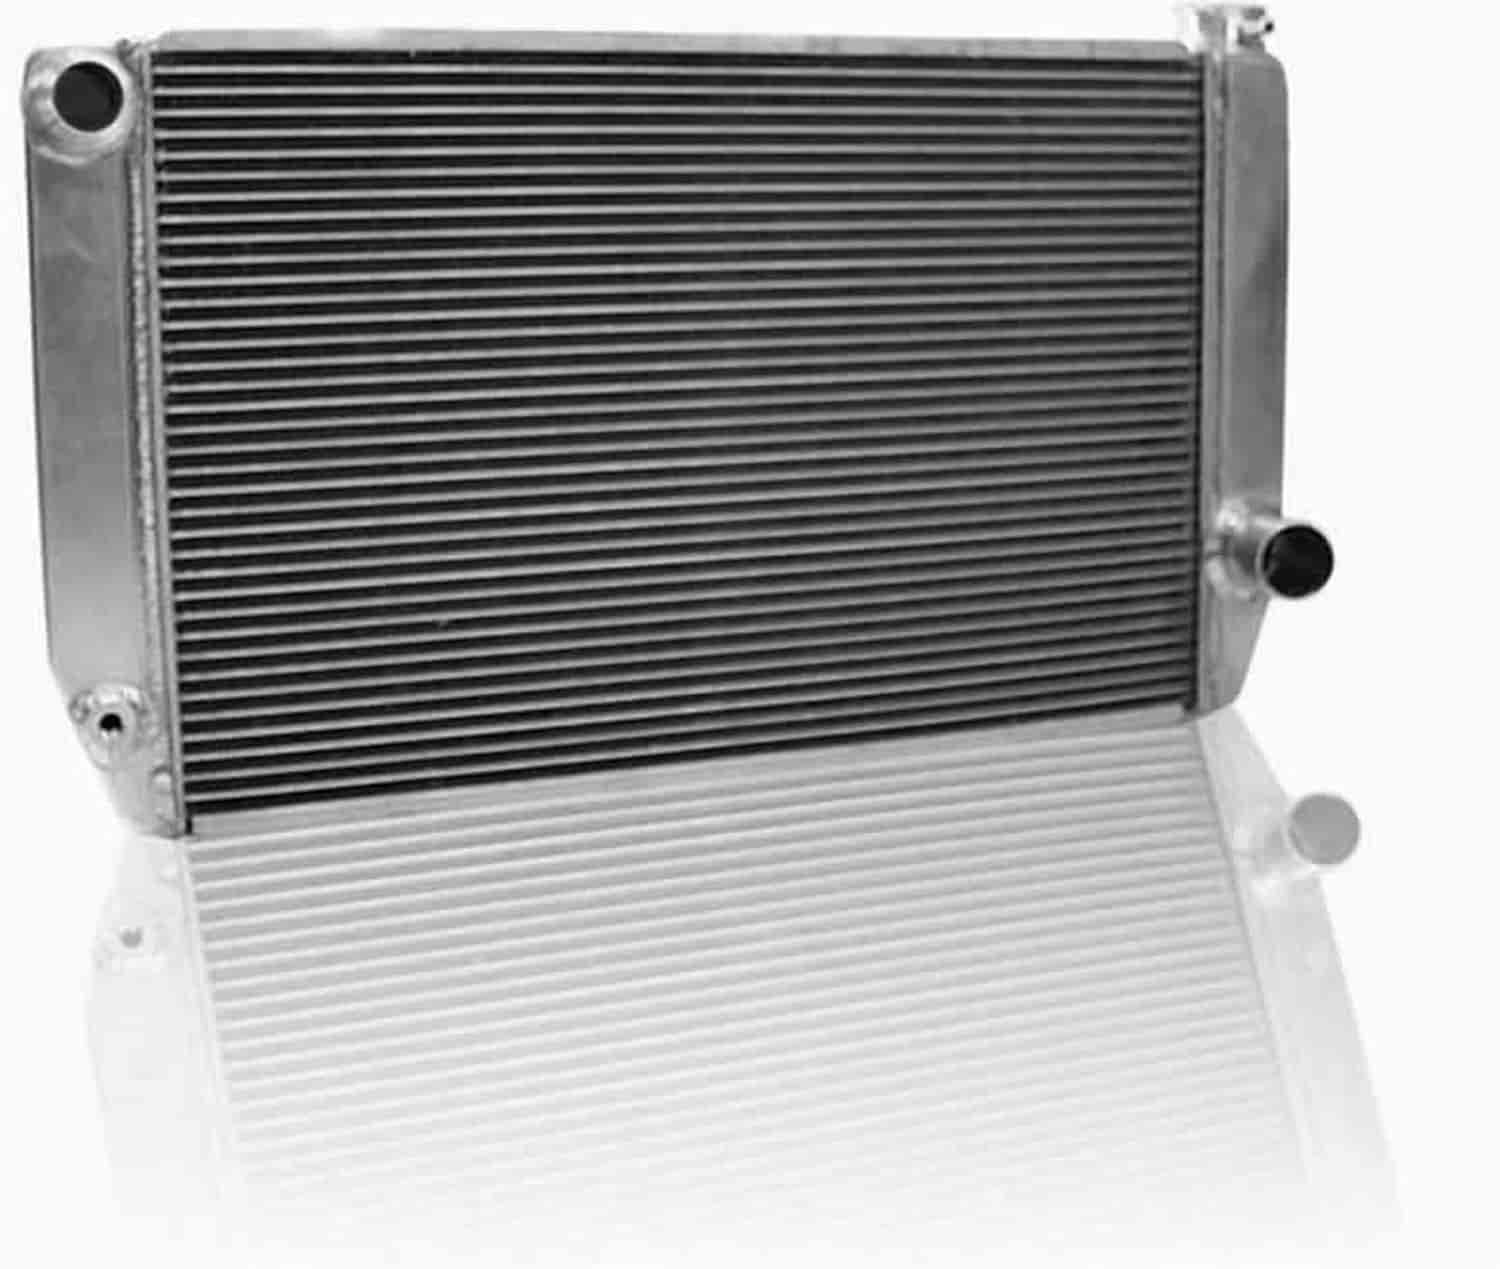 MegaCool Universal Fit Radiator Single Pass Crossflow Design 27.50" x 15.50" with 16AN Inlet